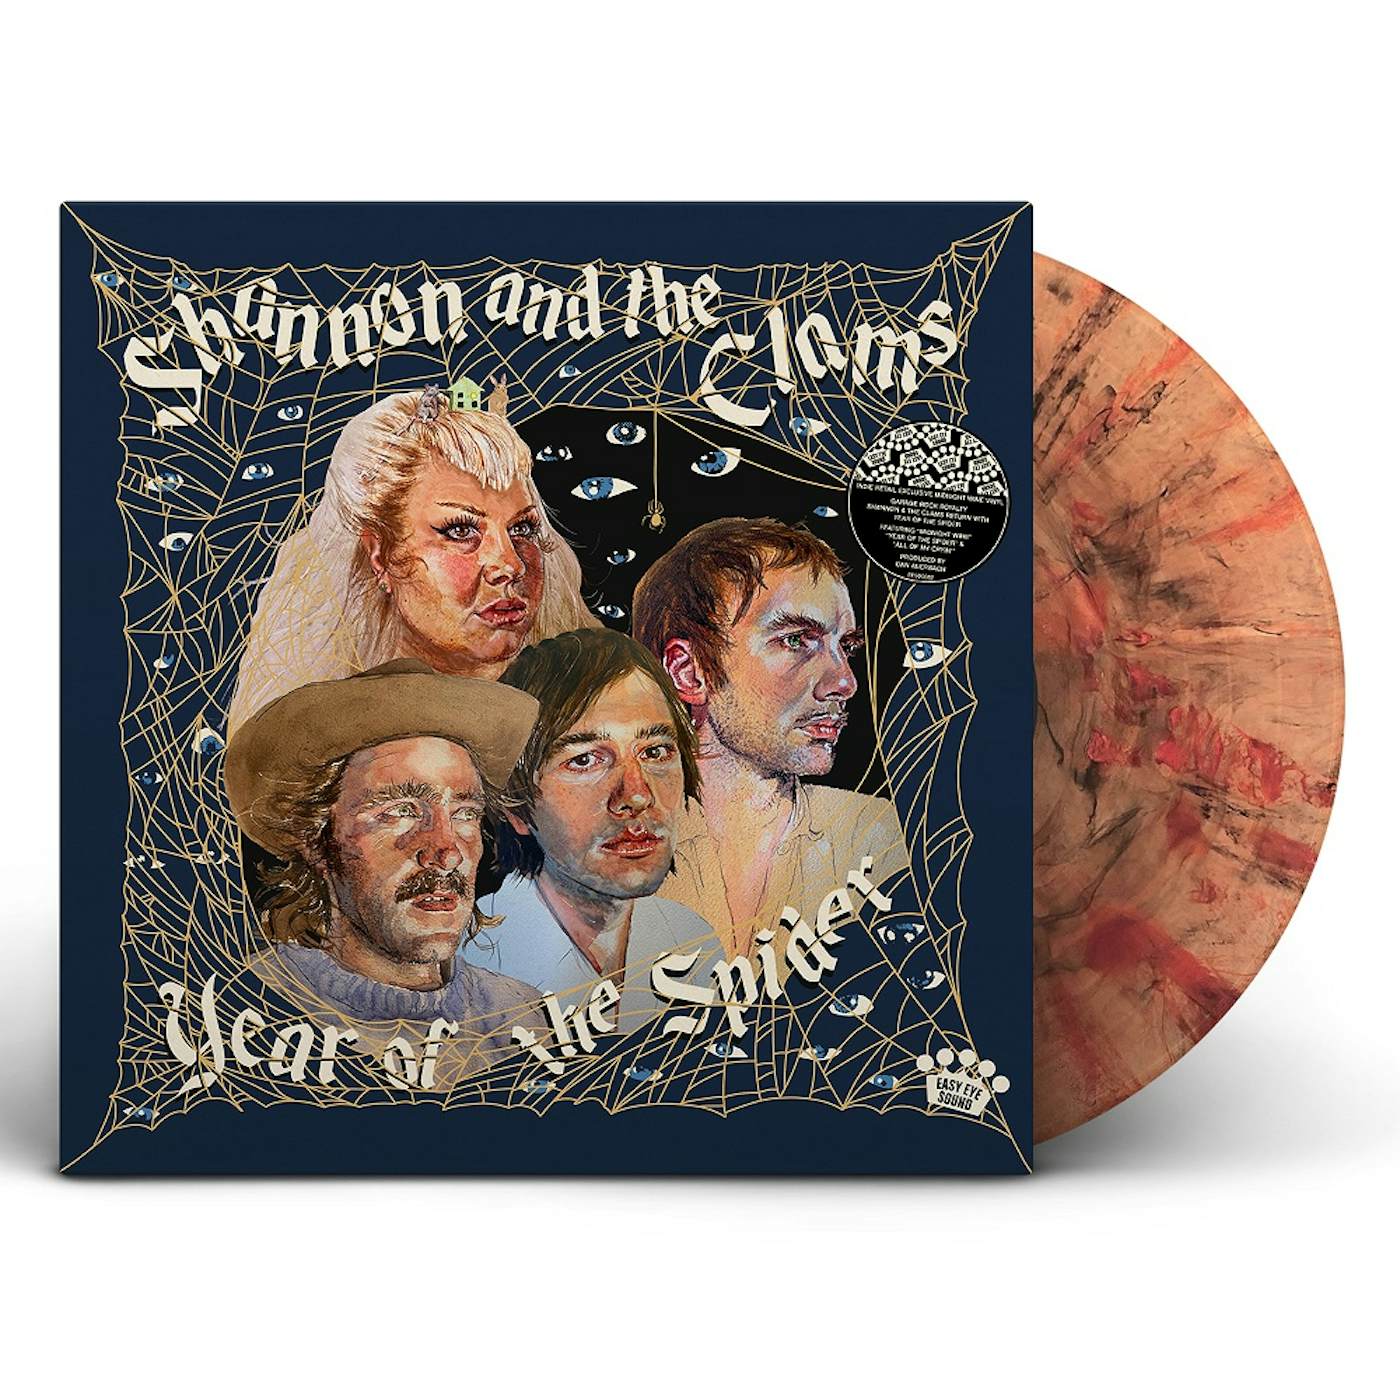 Shannon & The Clams YEAR OF THE SPIDER (MIDNIGHT WINE (PINK/BLACK SWIRL) VINYL) Vinyl Record